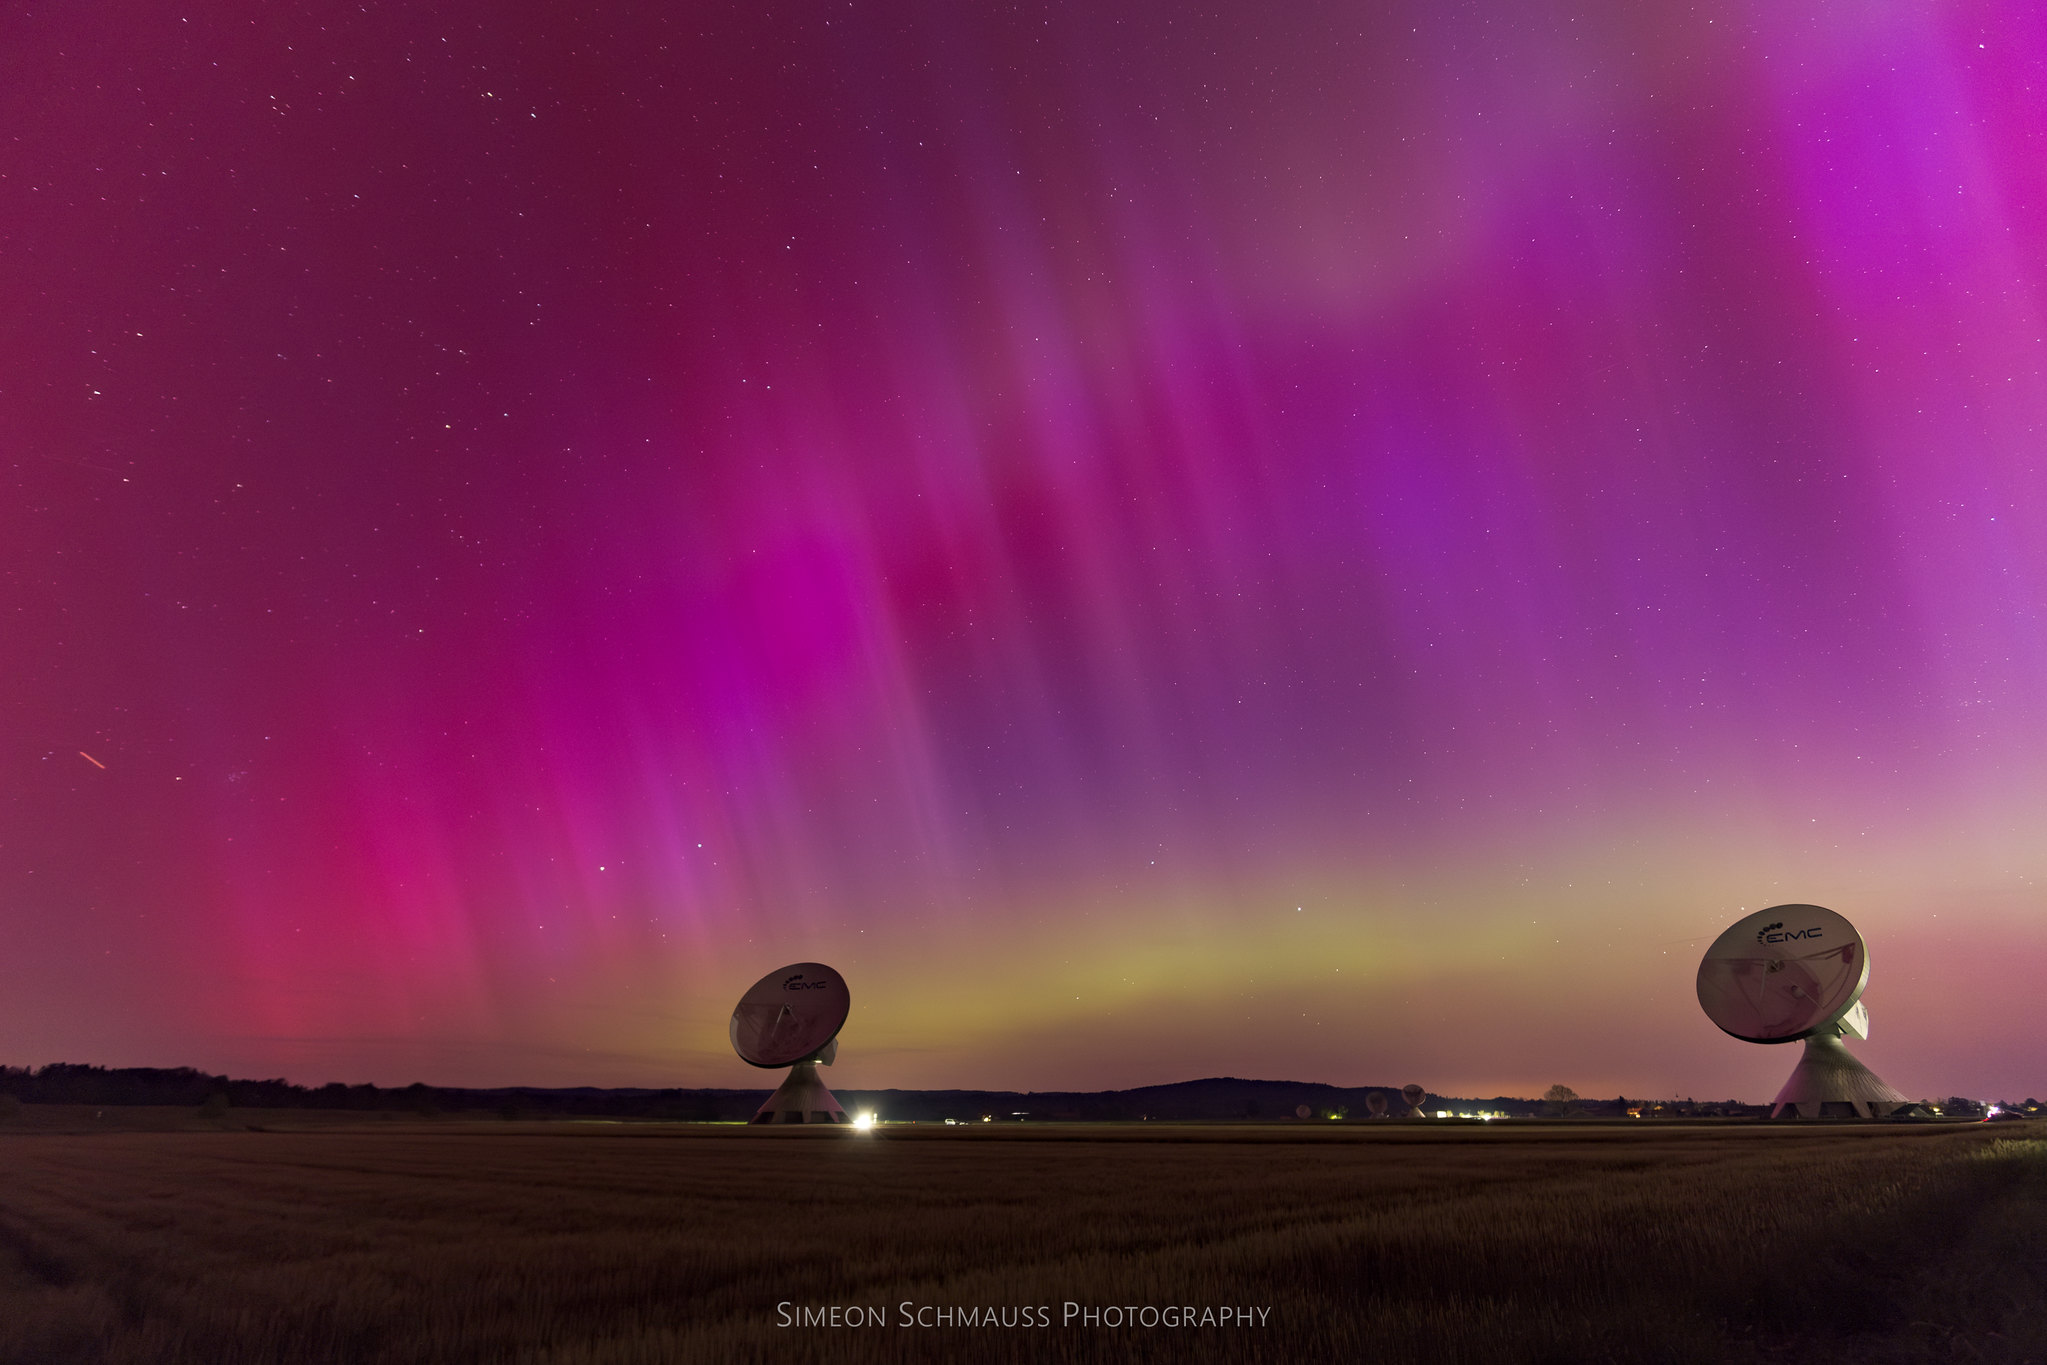 The most powerful solar storm in 20 years caused intense aurora: Impressive photos